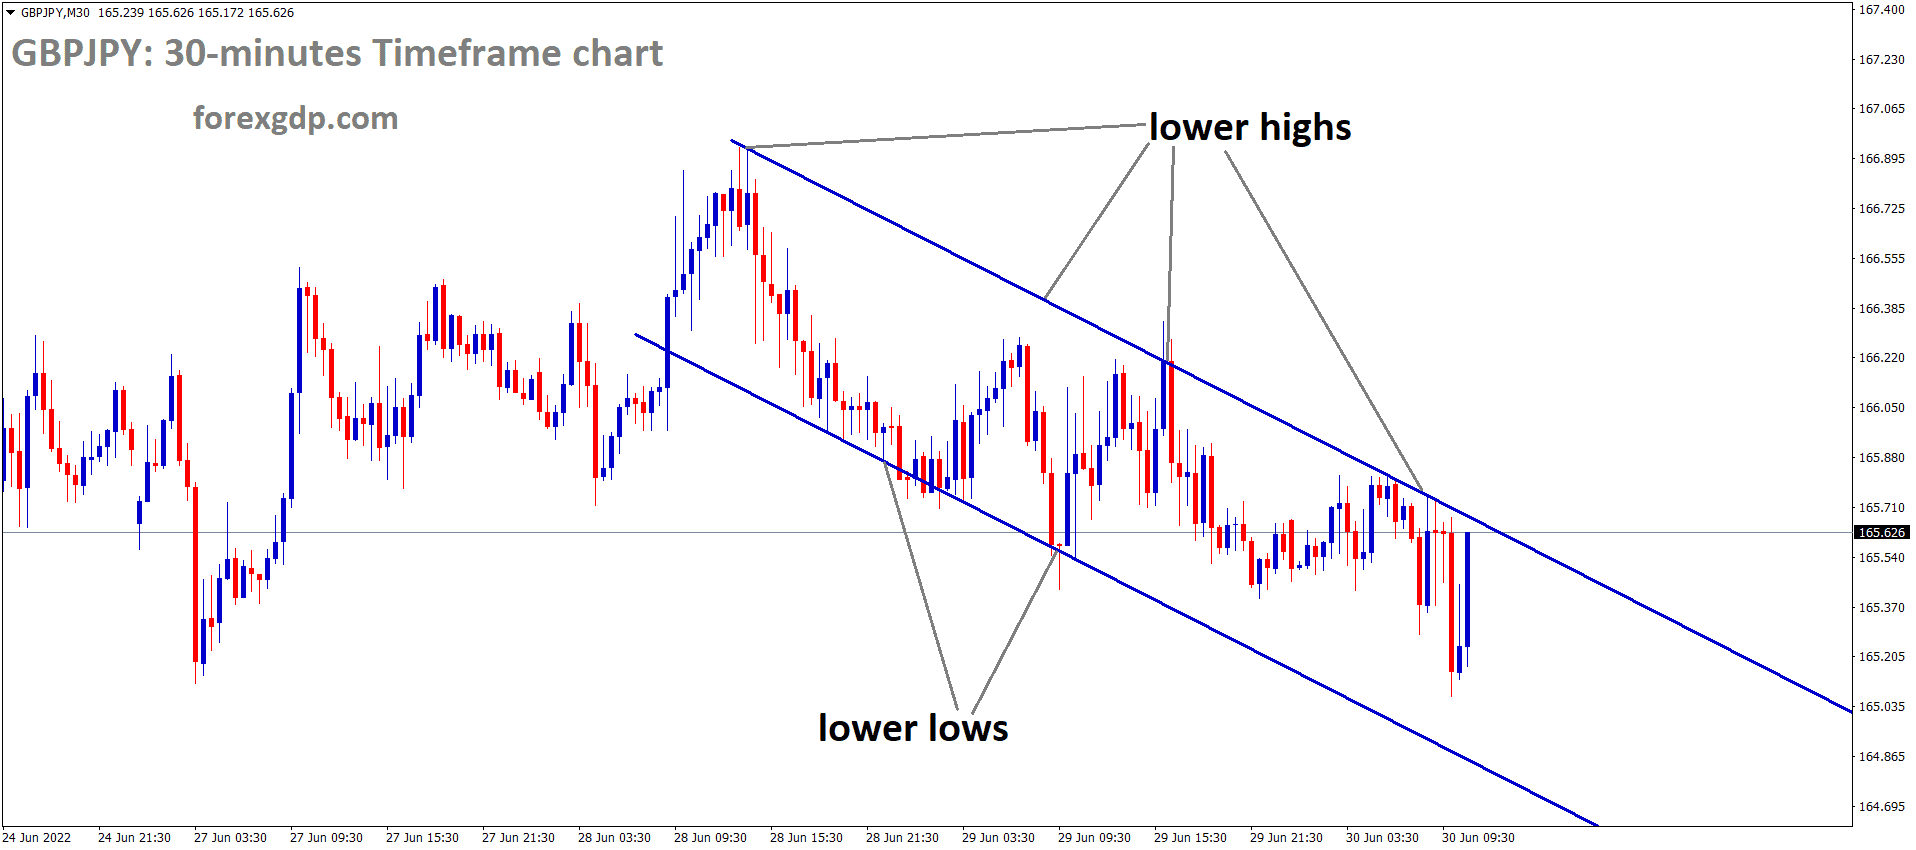 GBPJPY M30 Time Frame Analysis Market is moving in the Descending channel and the Market has reached the Lower high area of the channel.